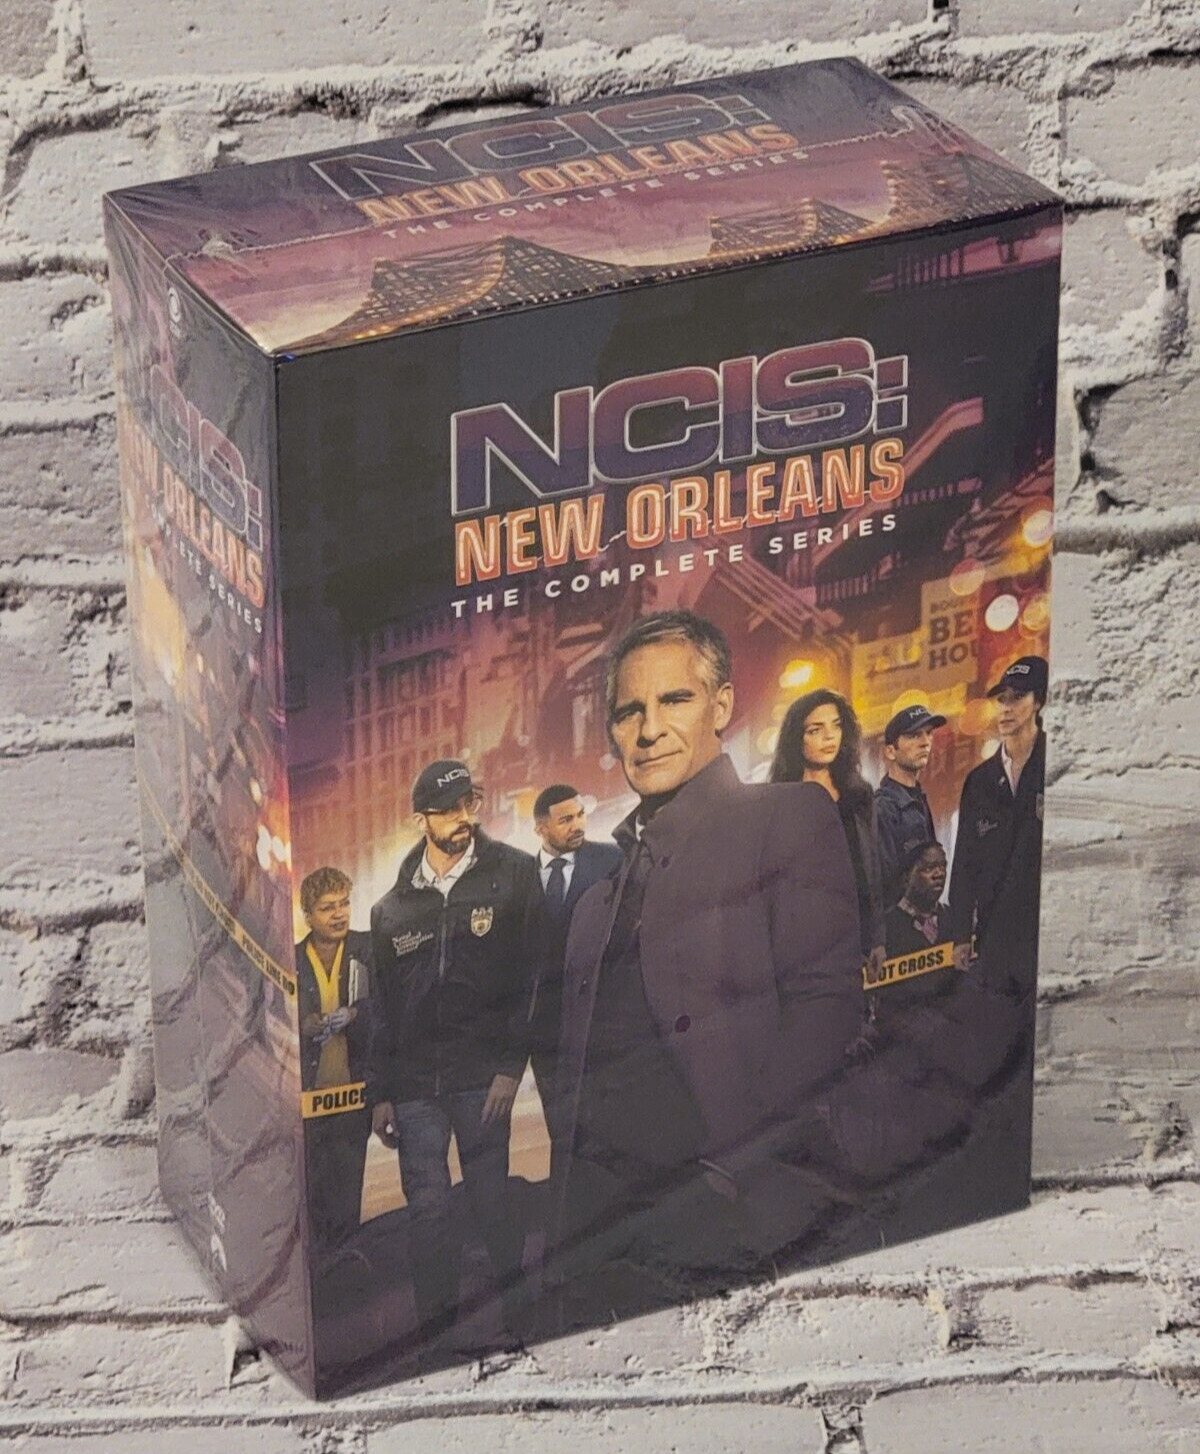 NCIS New Orleans: The Complete Series Seasons 1-7 ( DVD Set ) Brand New & Sealed